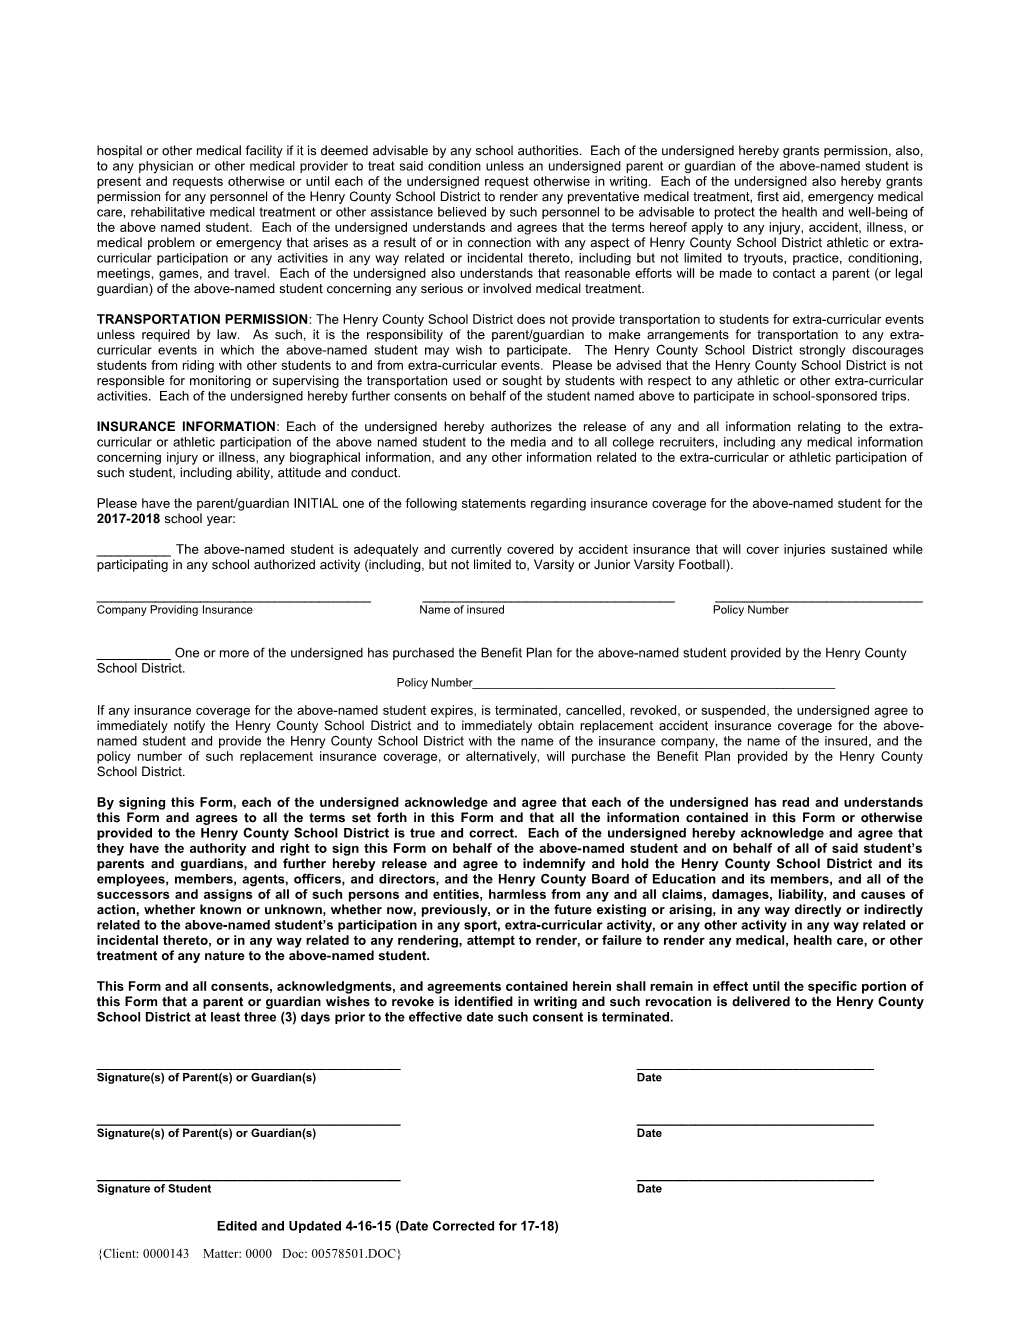 2010 Draft Extracurricular Consent Form (00578501-7)